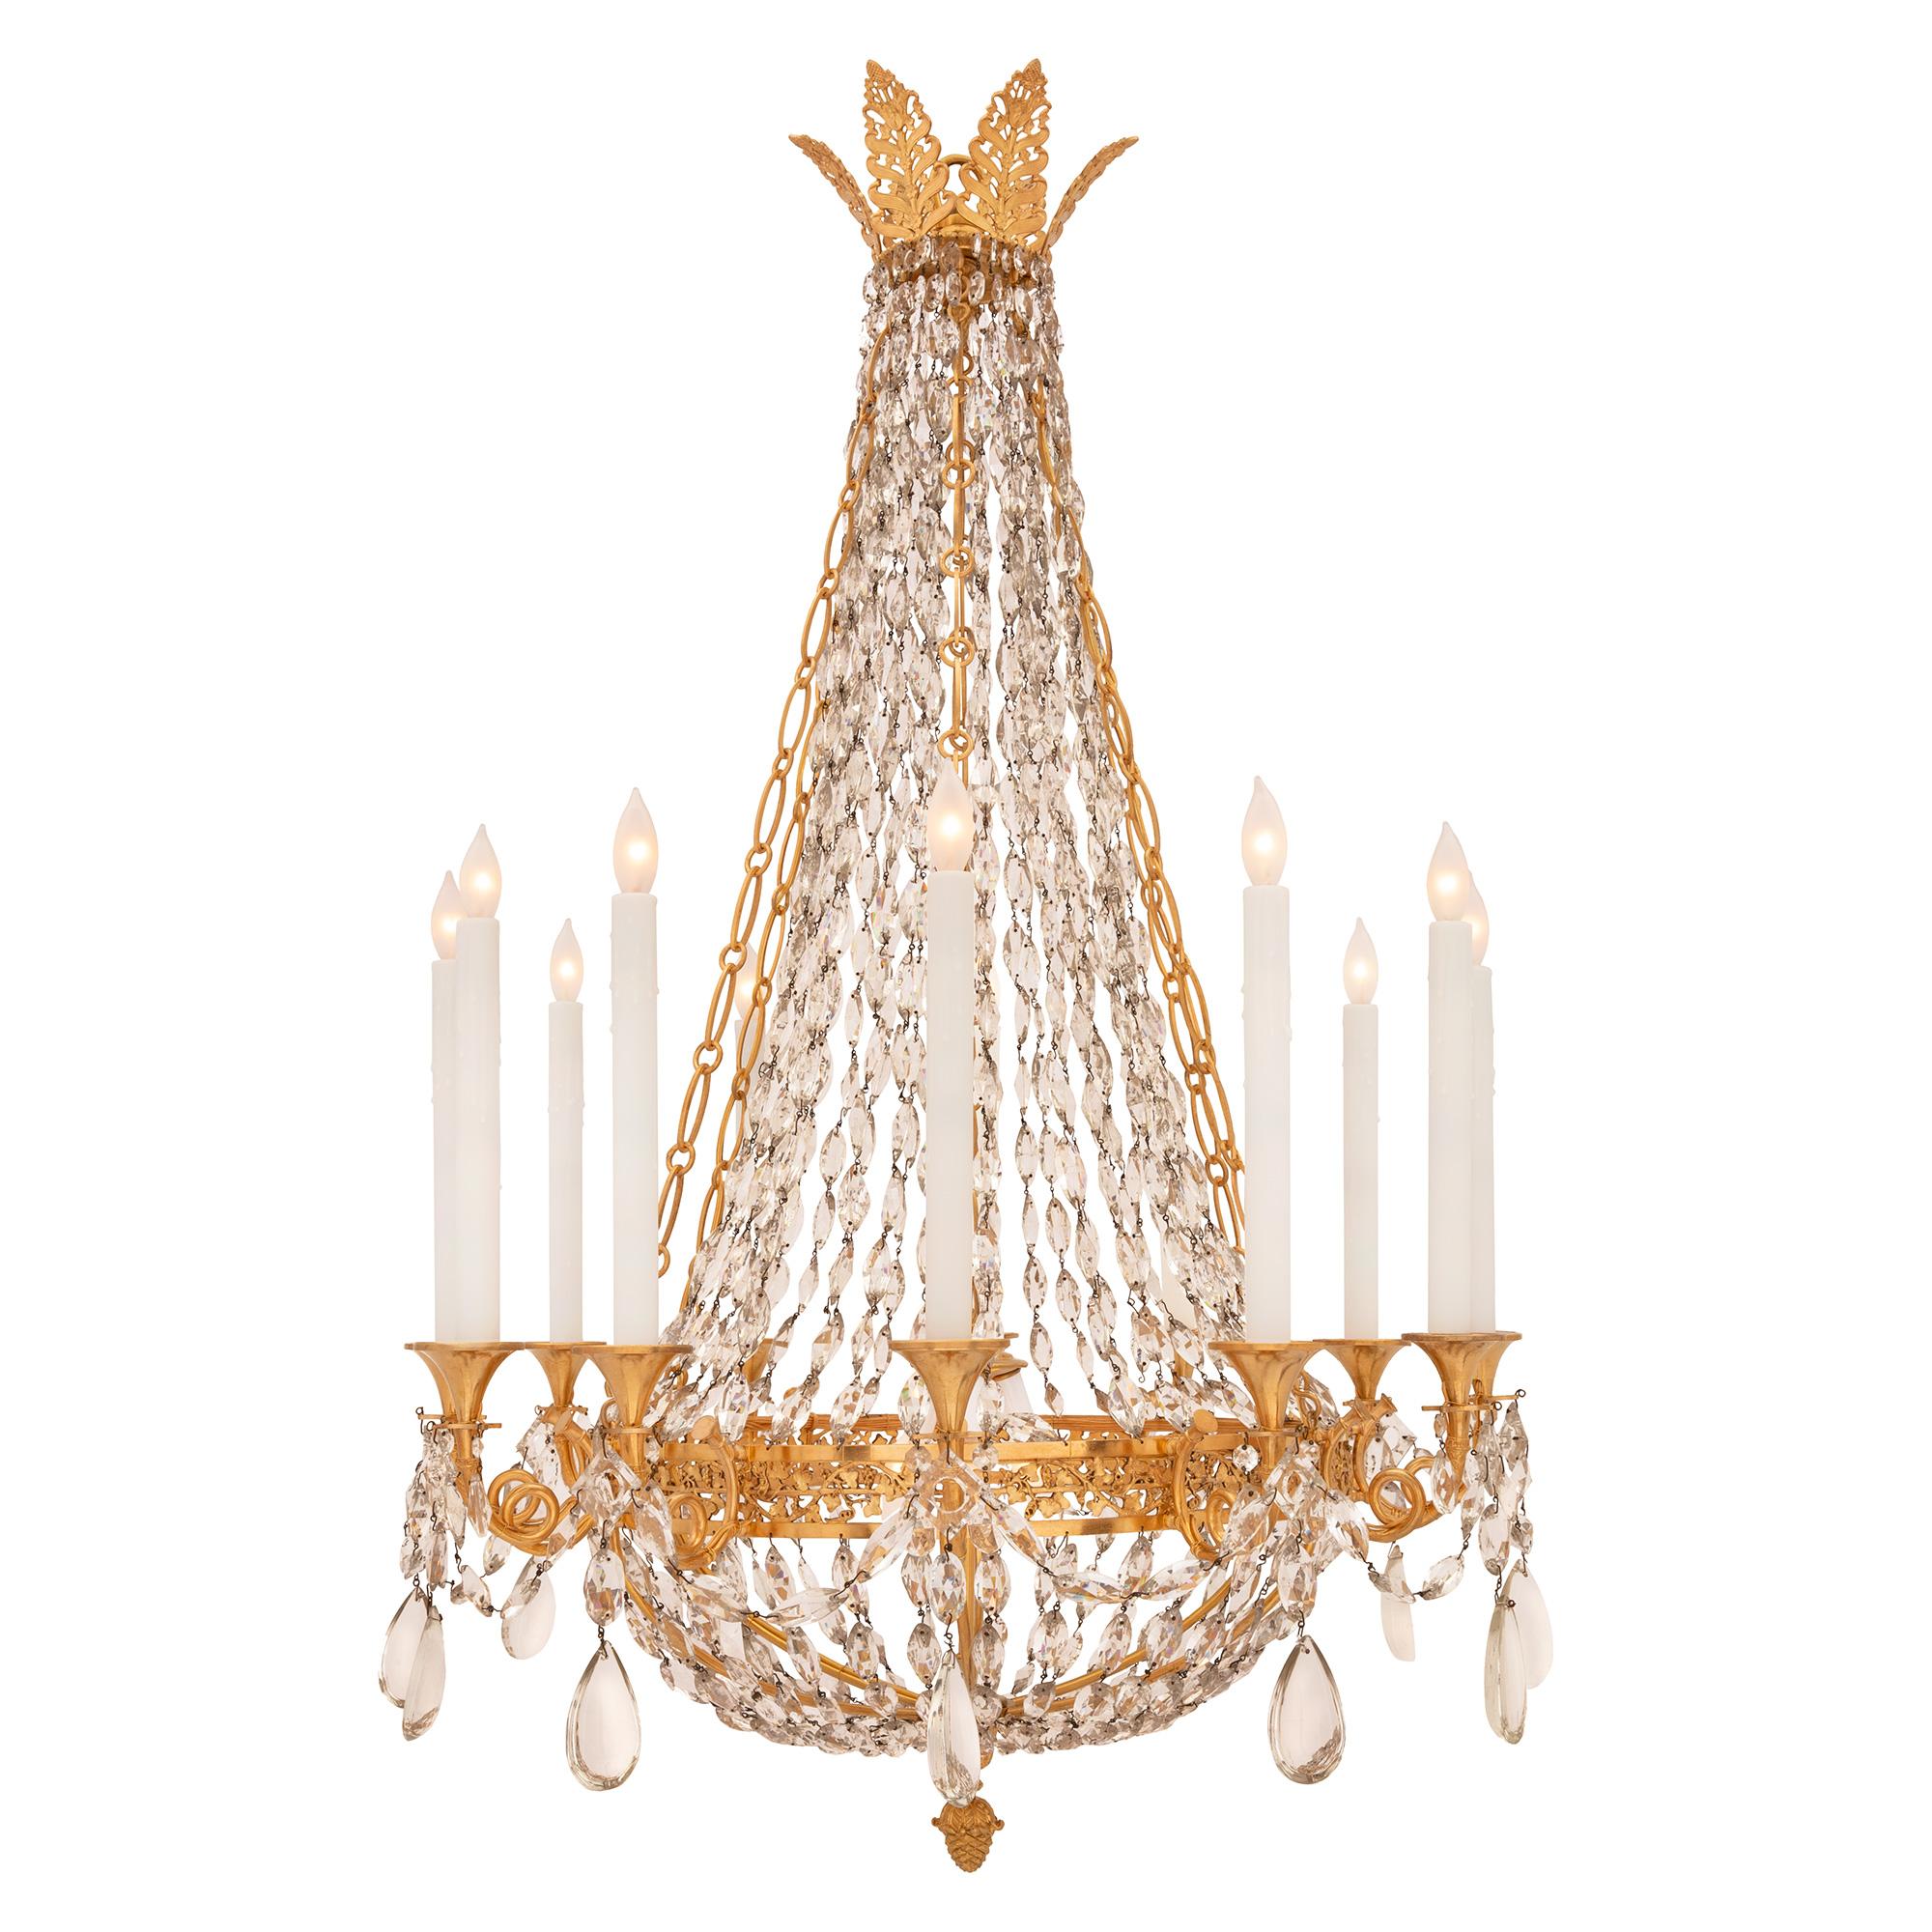 A striking French 19th century neo-classical st. ormolu and Baccarat crystal chandelier. The twelve arm fifteen light chandelier is centered by an elegant richly chased acorn finial below a lovely foliate reserve and leading out to a beautiful array